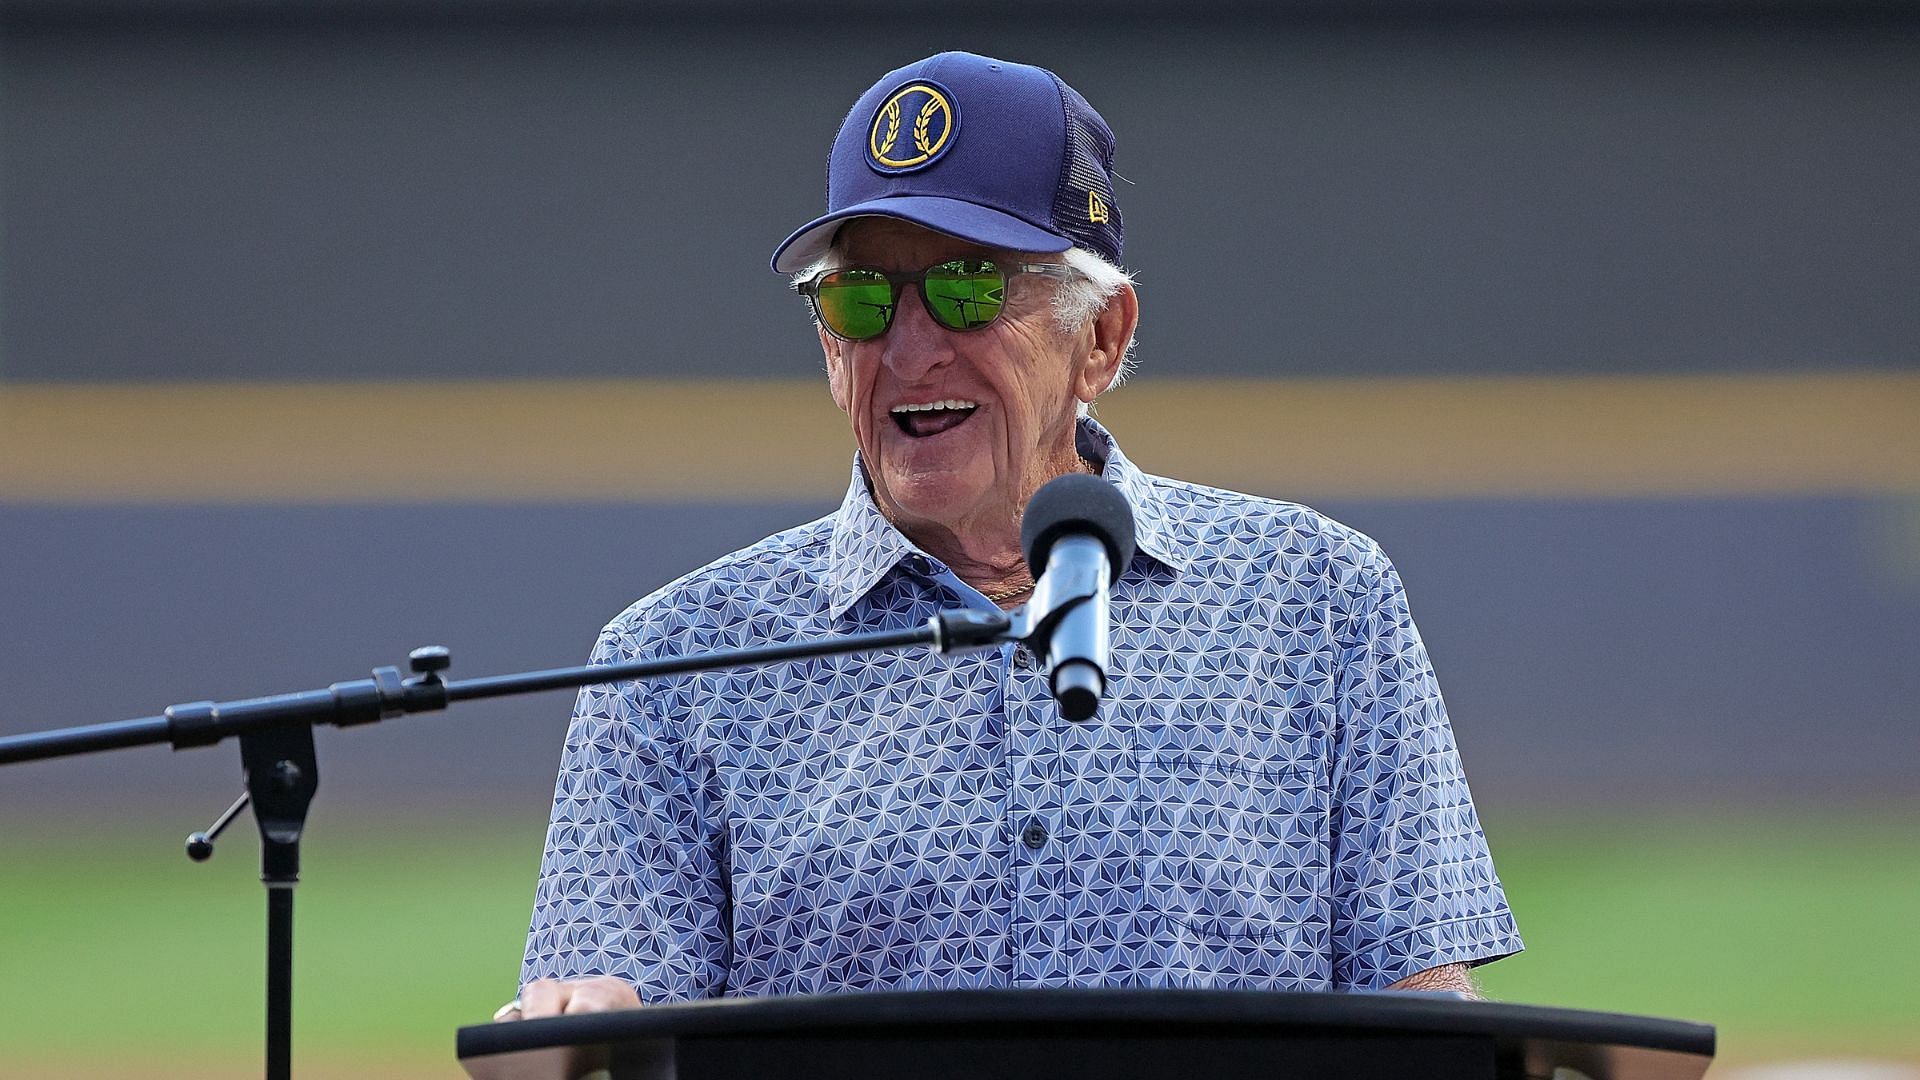 Uecker is one of the most famed people in the Brewers franchise